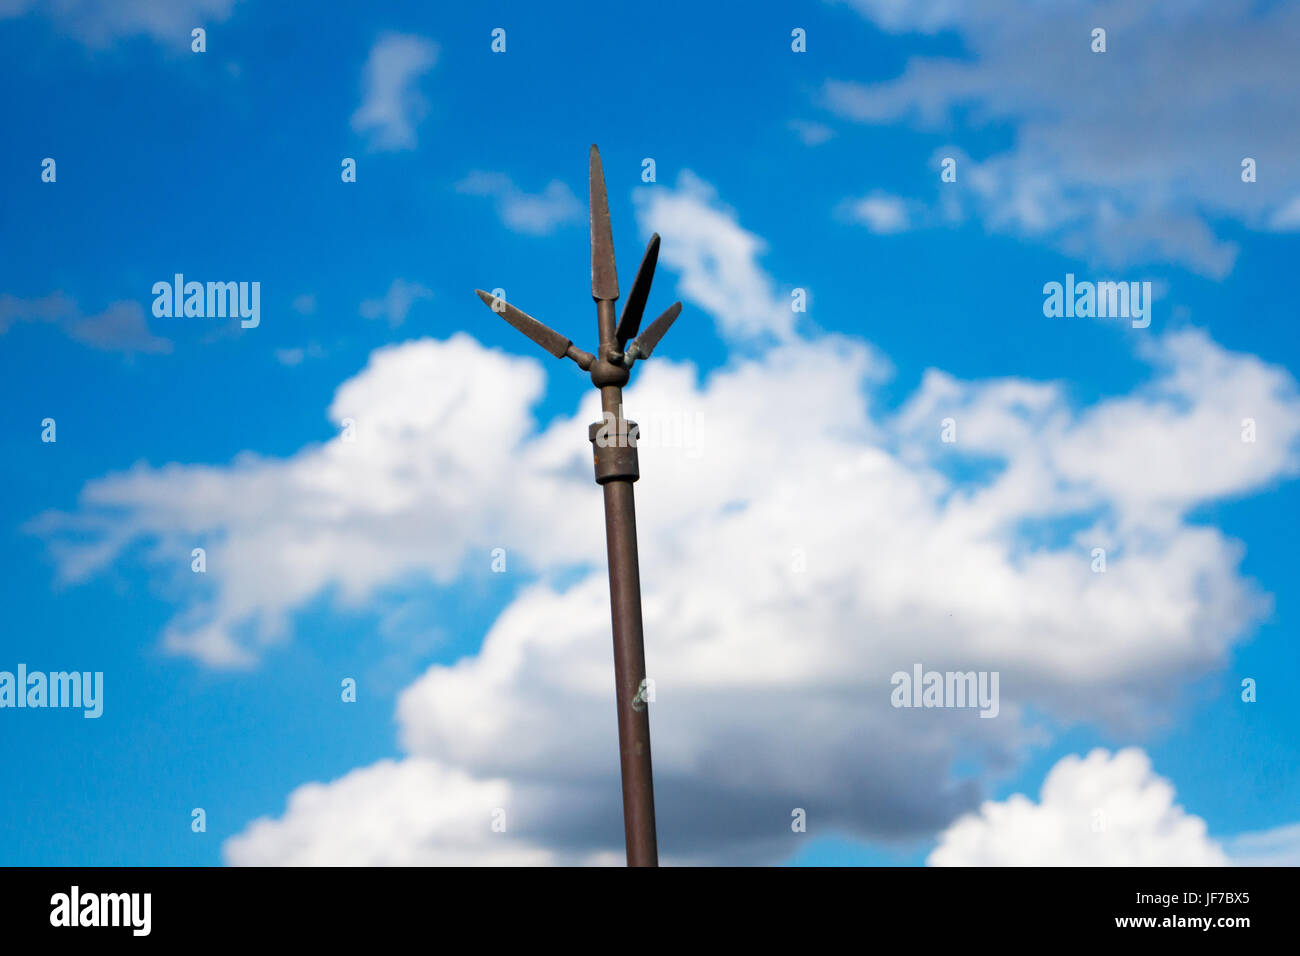 Blue sky with white cloud Stock Photo